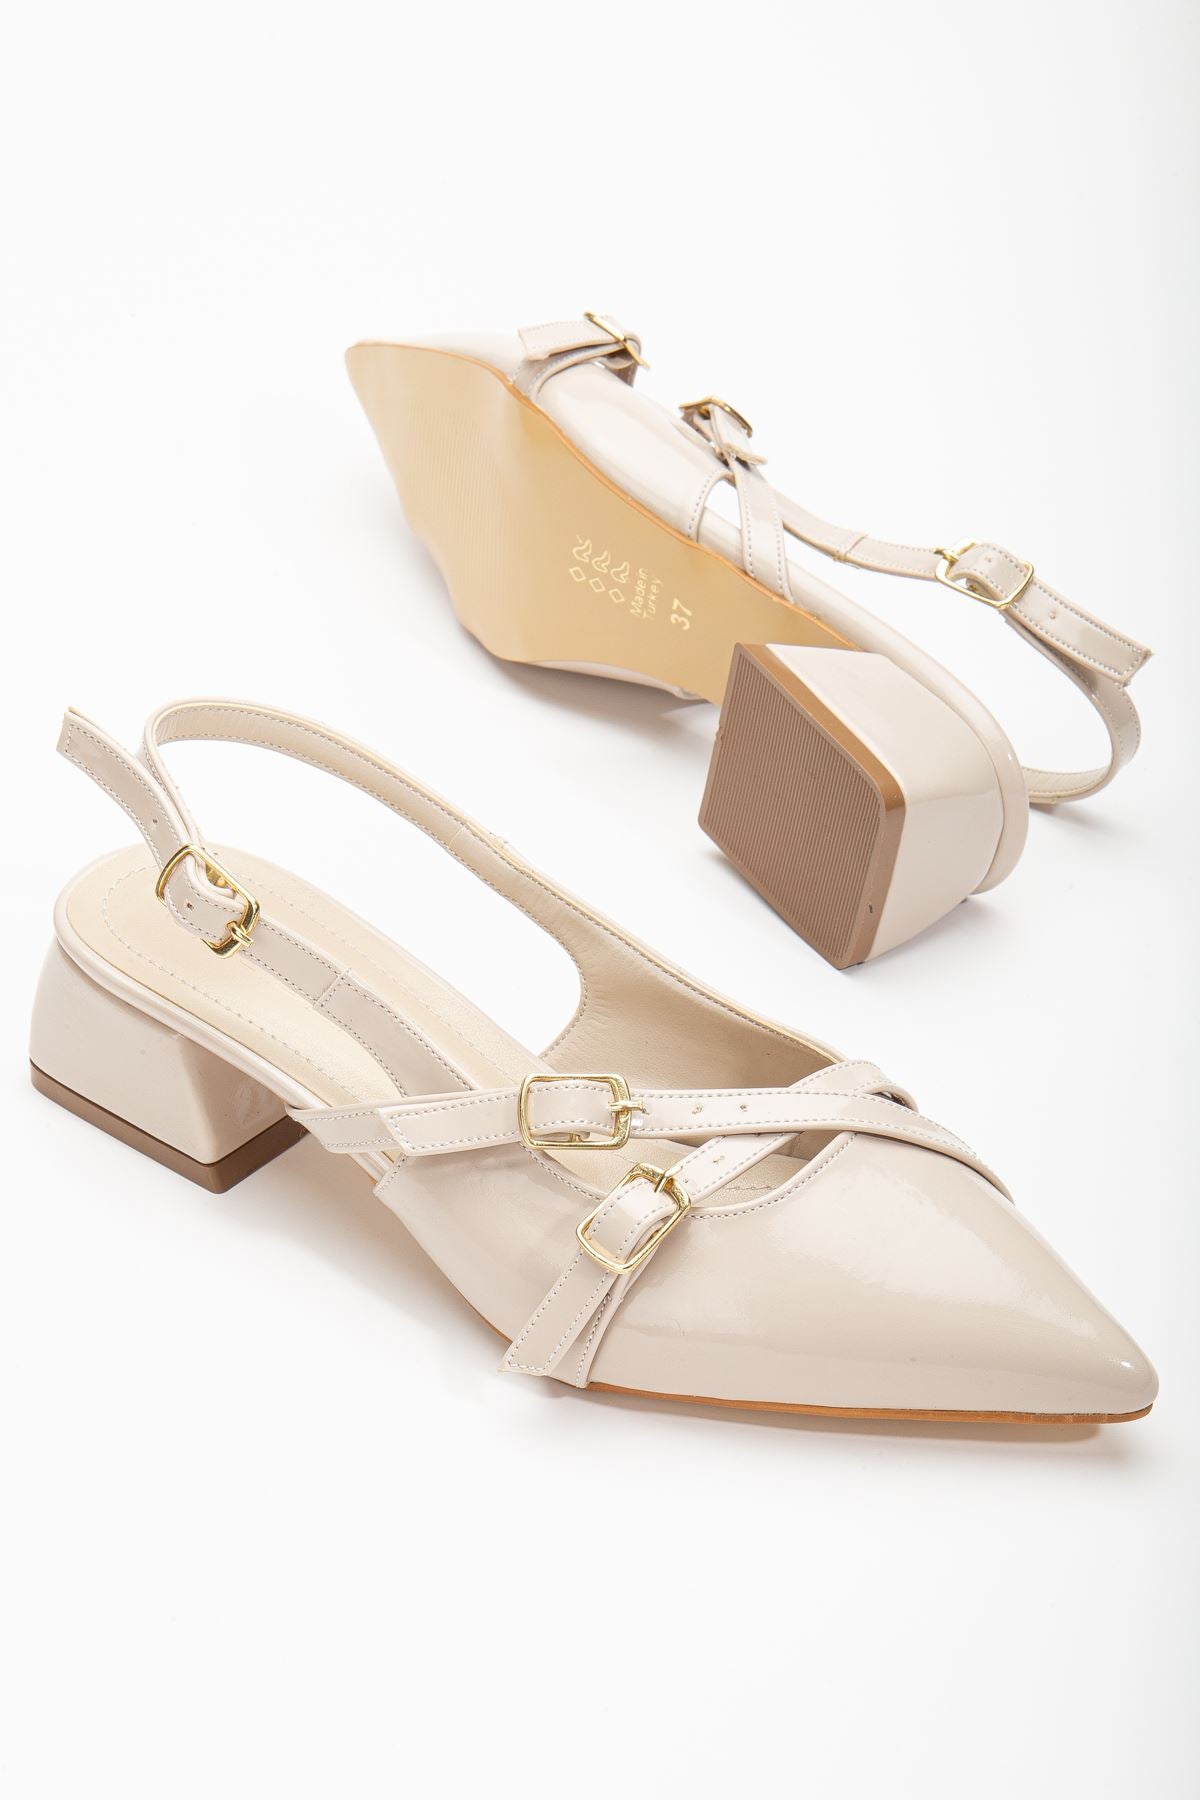 Pary Cream Patent Leather Women's Heeled Shoes - STREETMODE™